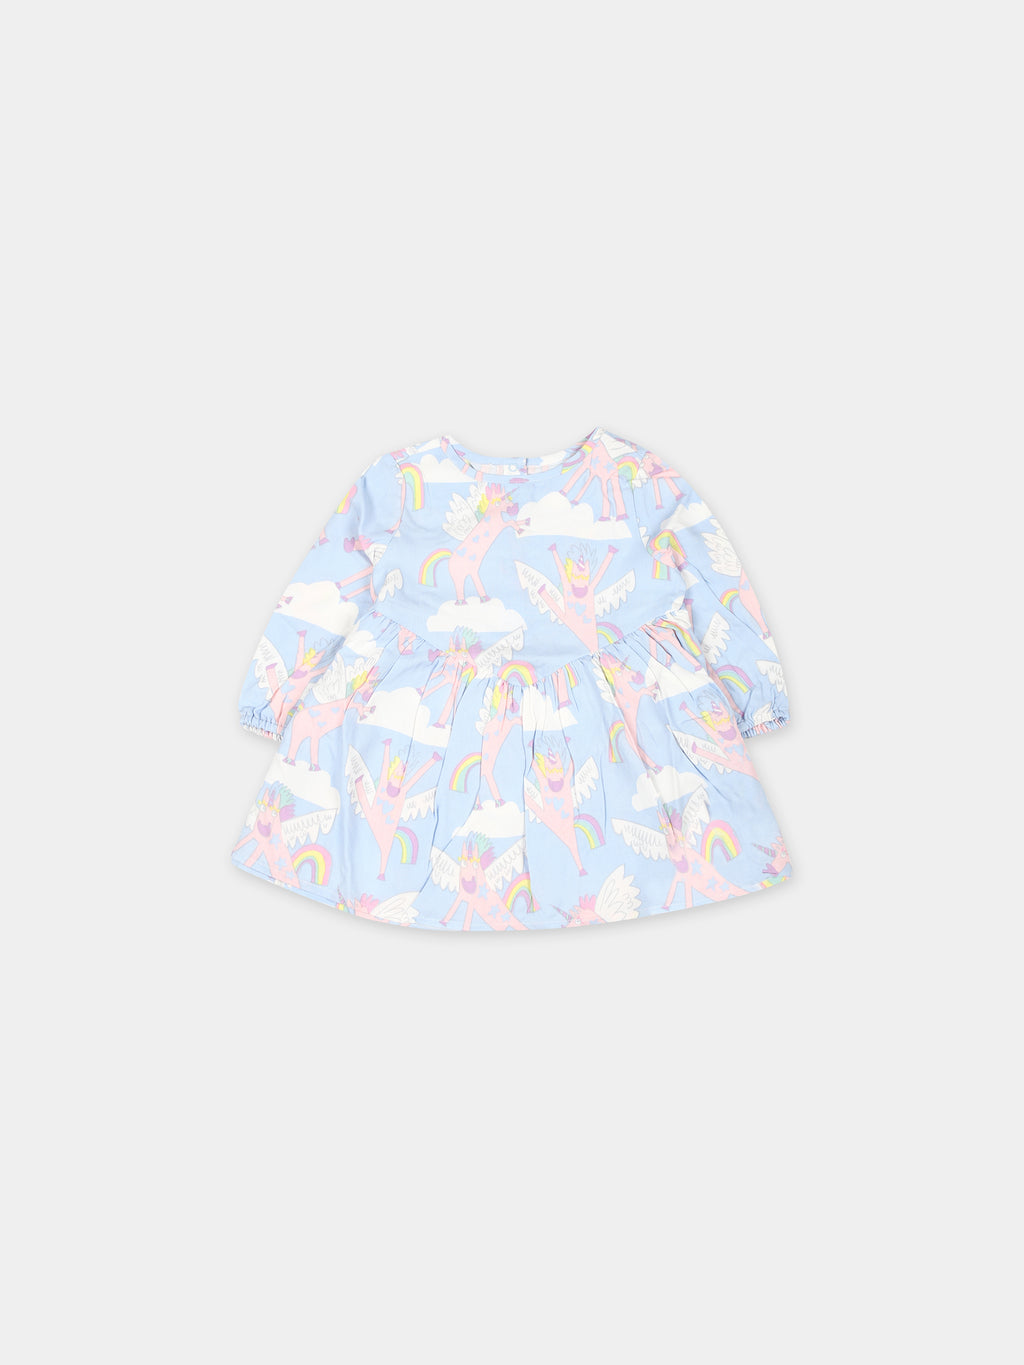 Light blue dress for baby girl with unicorn